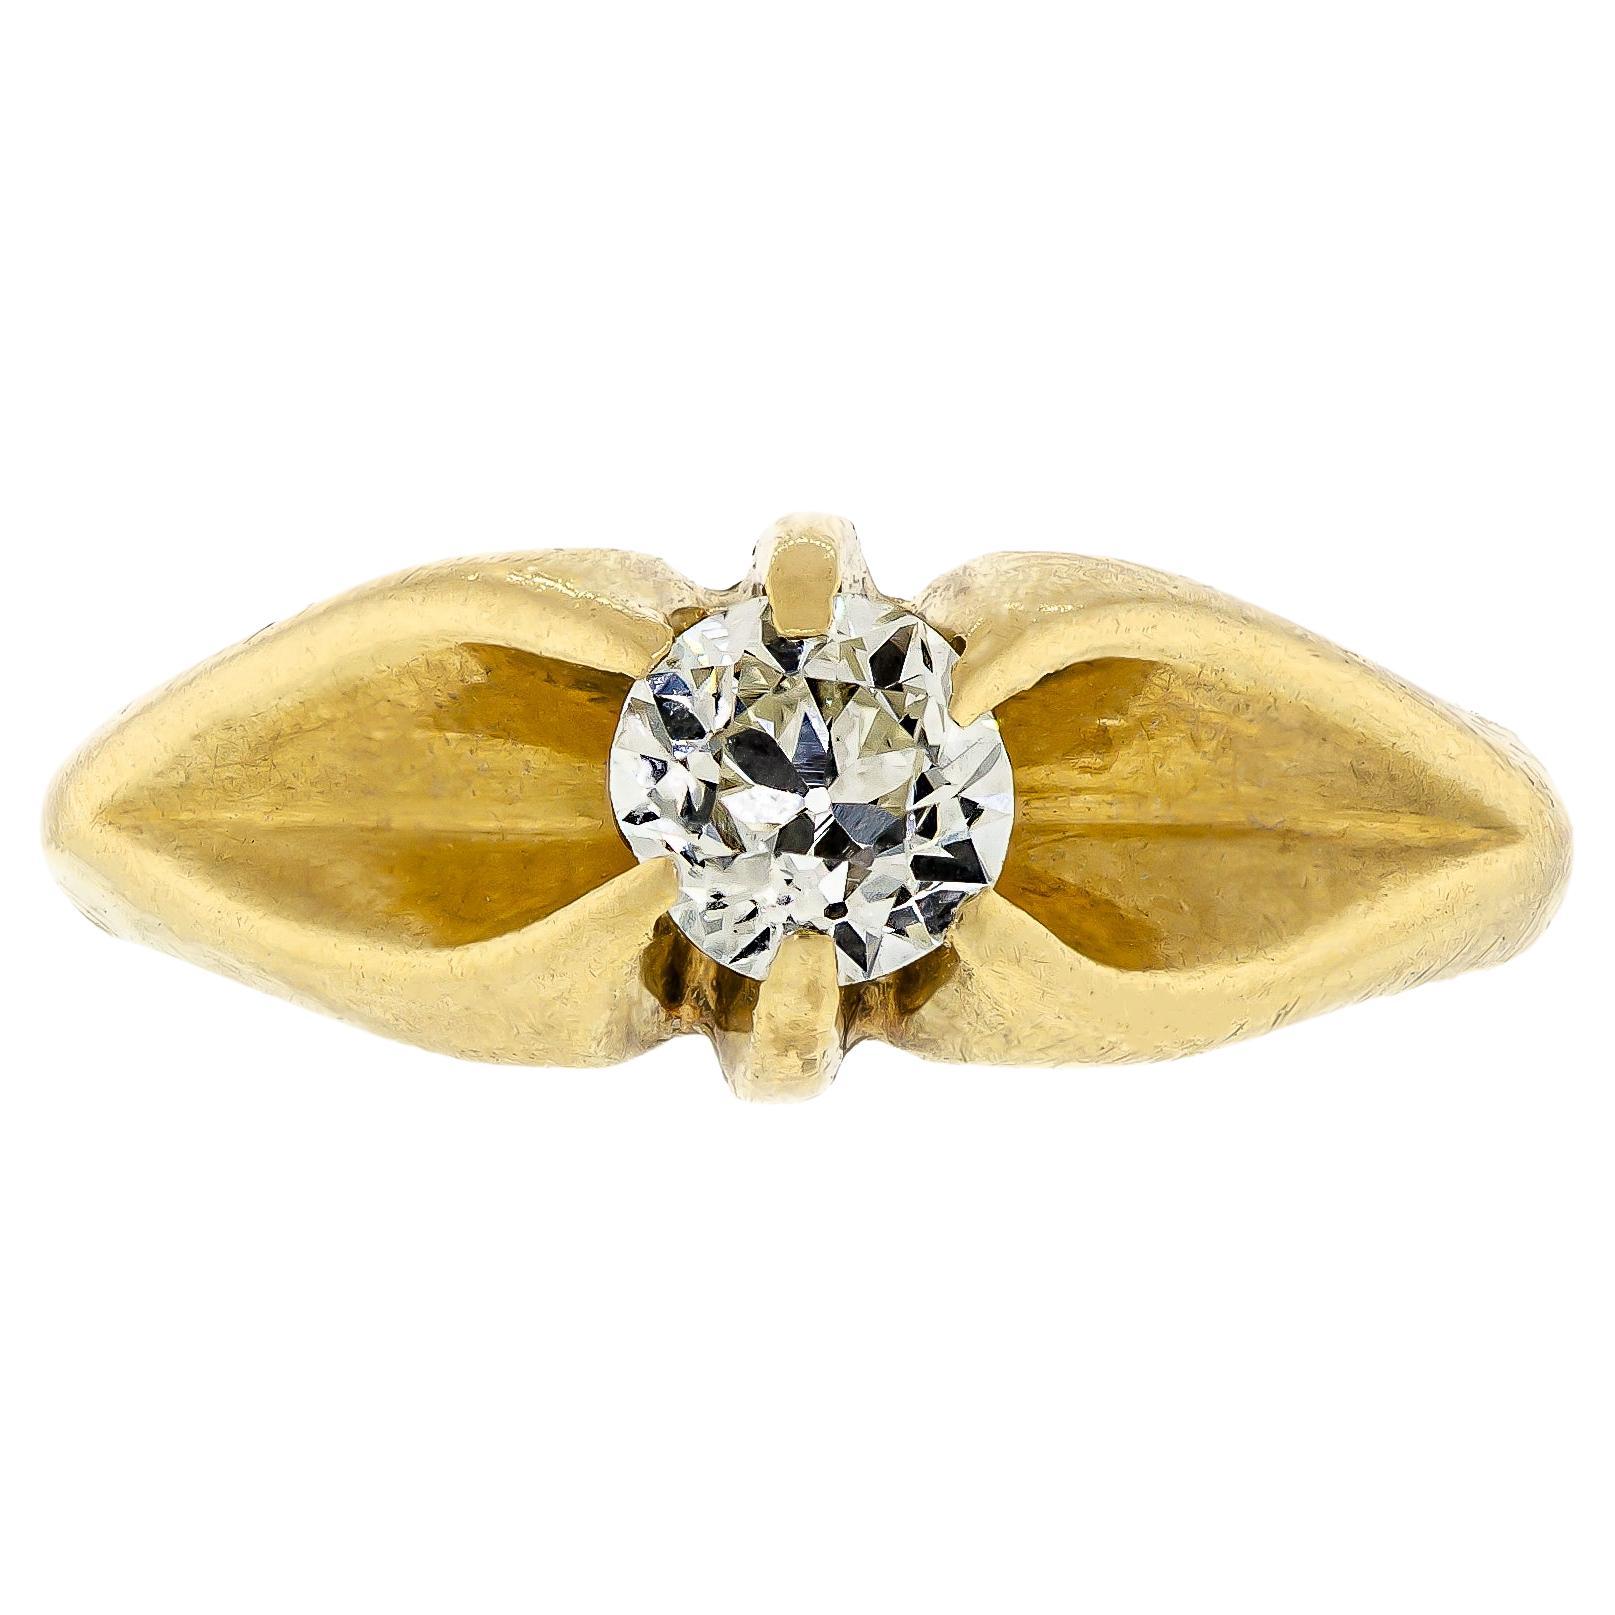 Attractive Victorian Circa 1895 14K Yellow Gold and Diamond Ring For Sale